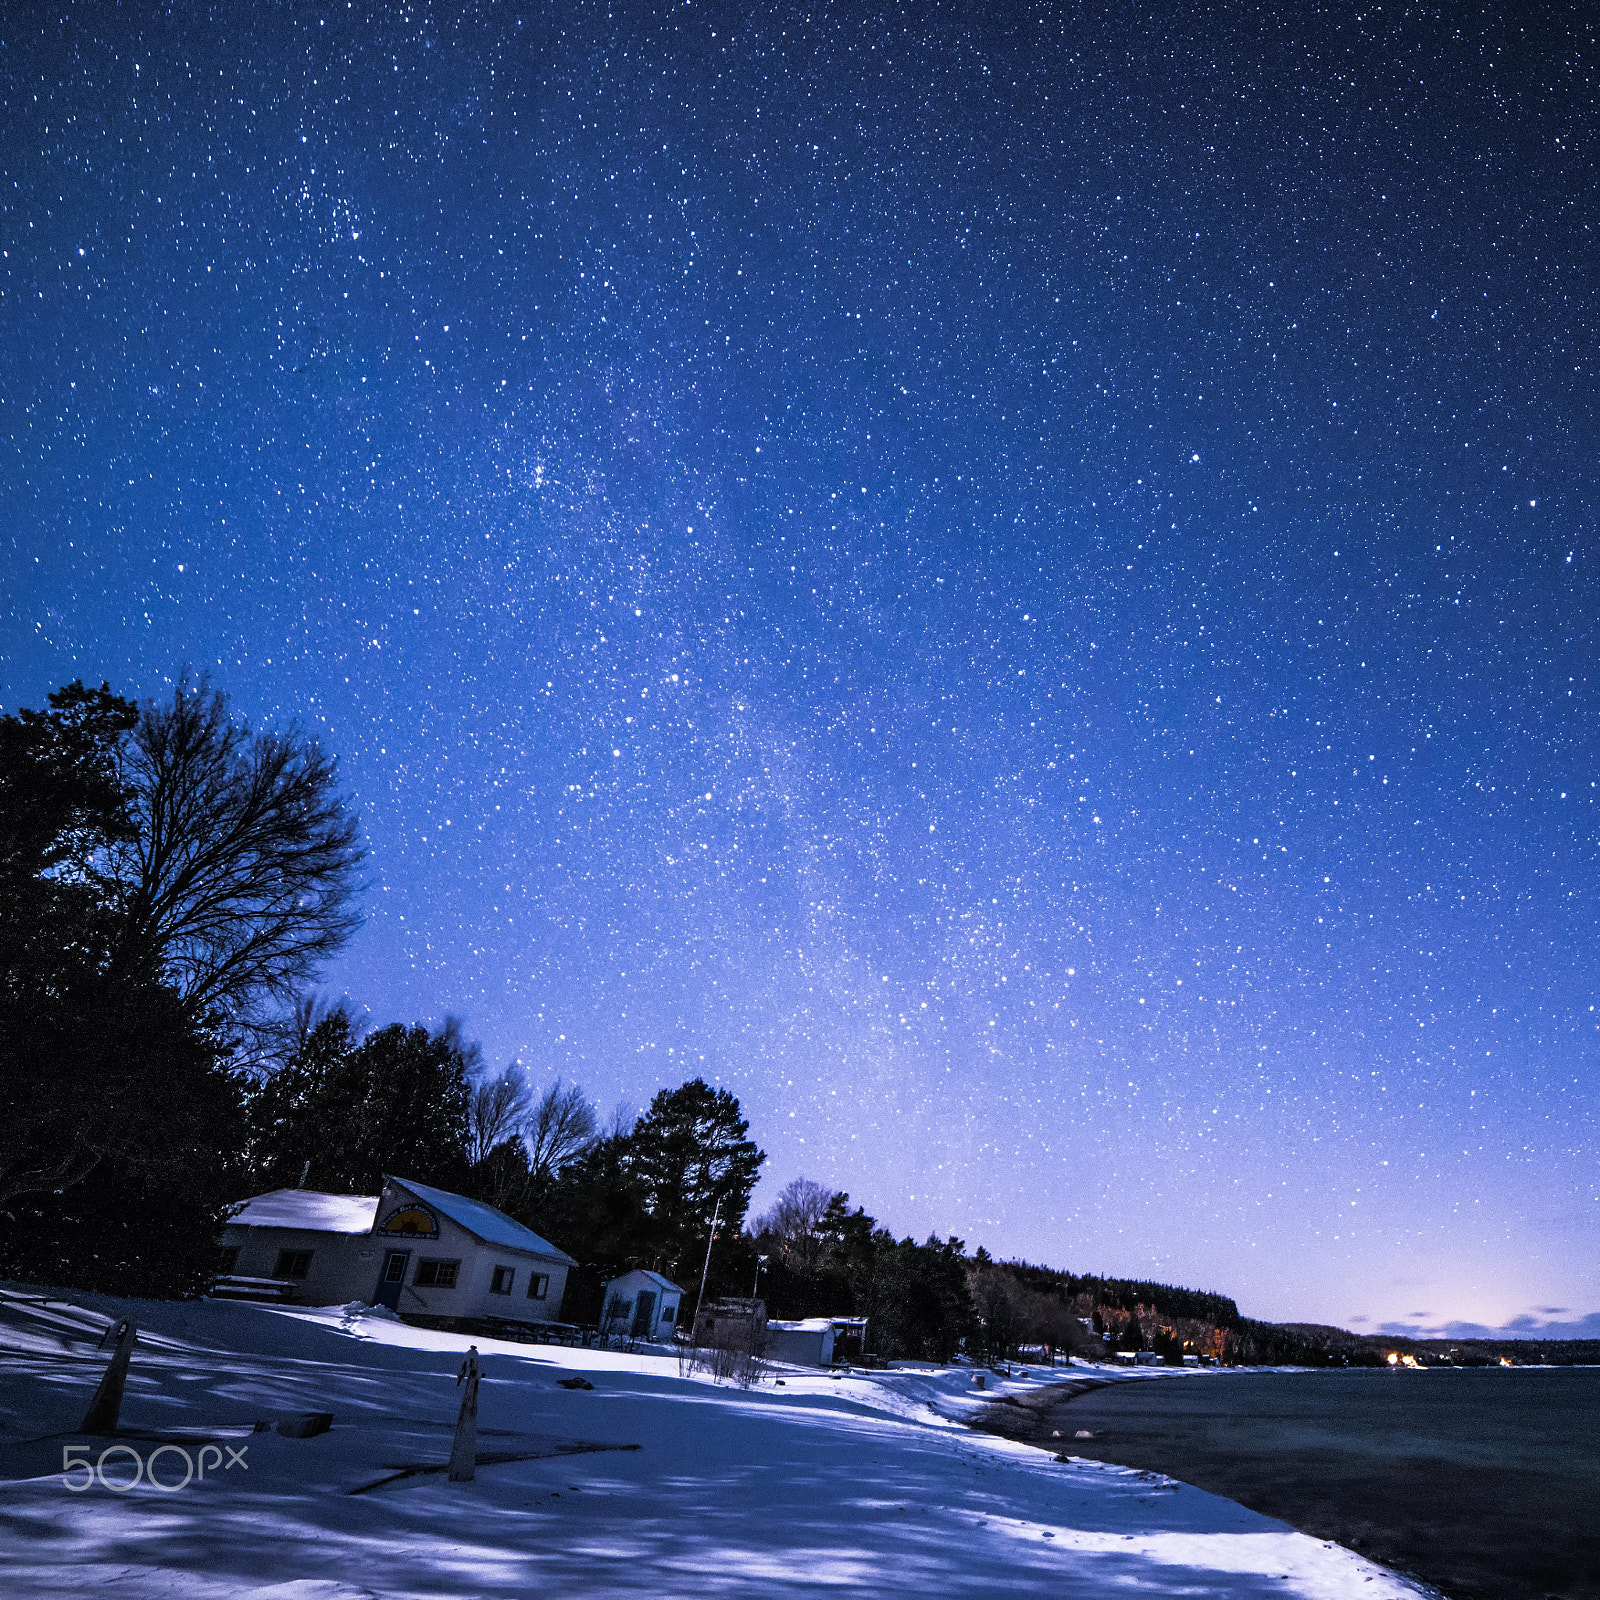 Nikon D800 sample photo. Dyers bay, bruce peninsula at night time with milky way and star photography